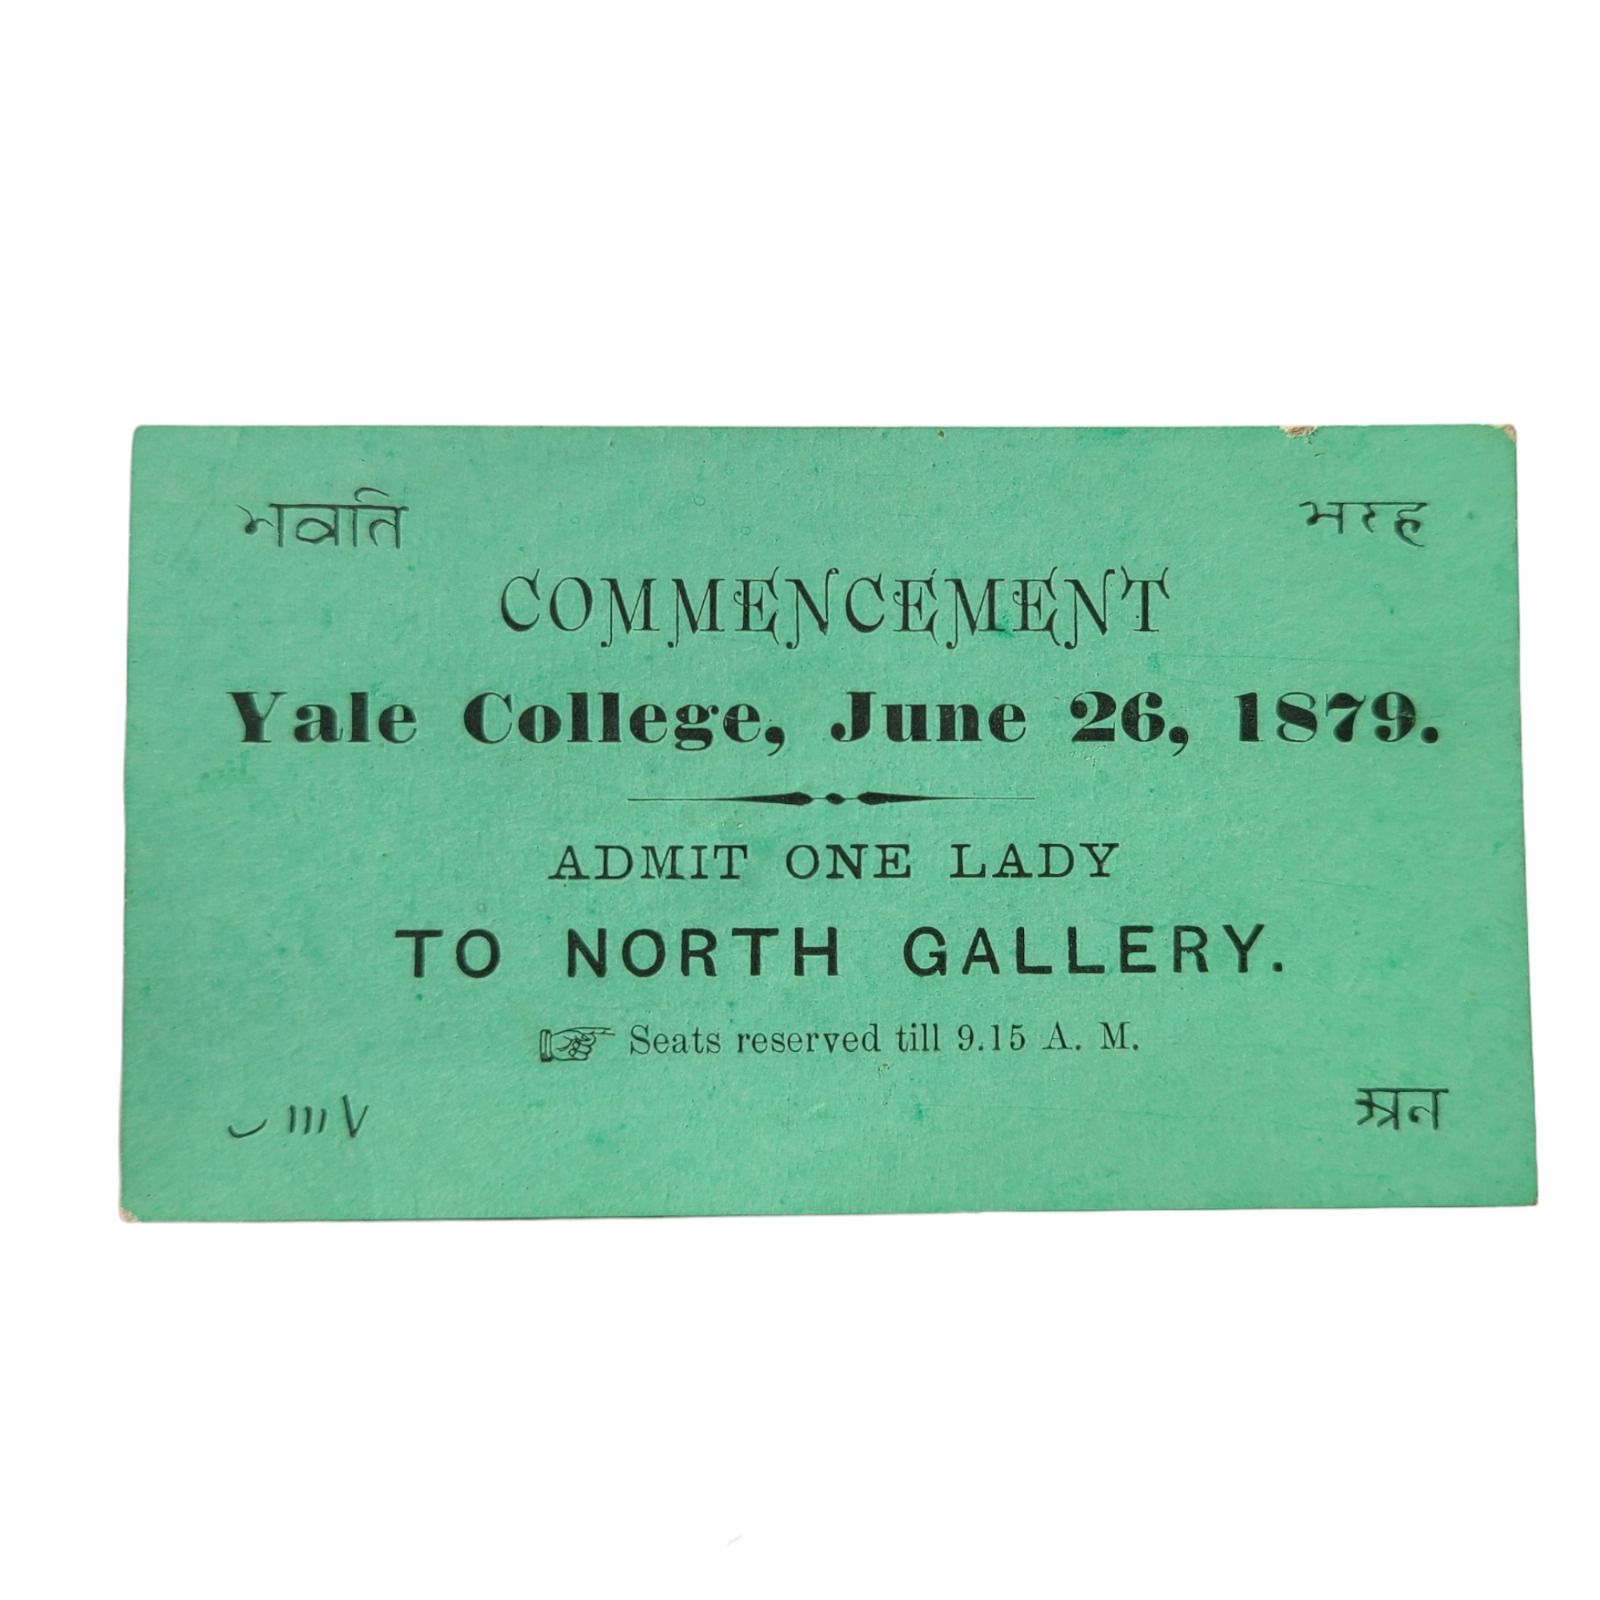 Vintage 1879 YALE WOMAN's Only Ticket to Commencement Pre Suffrage Class